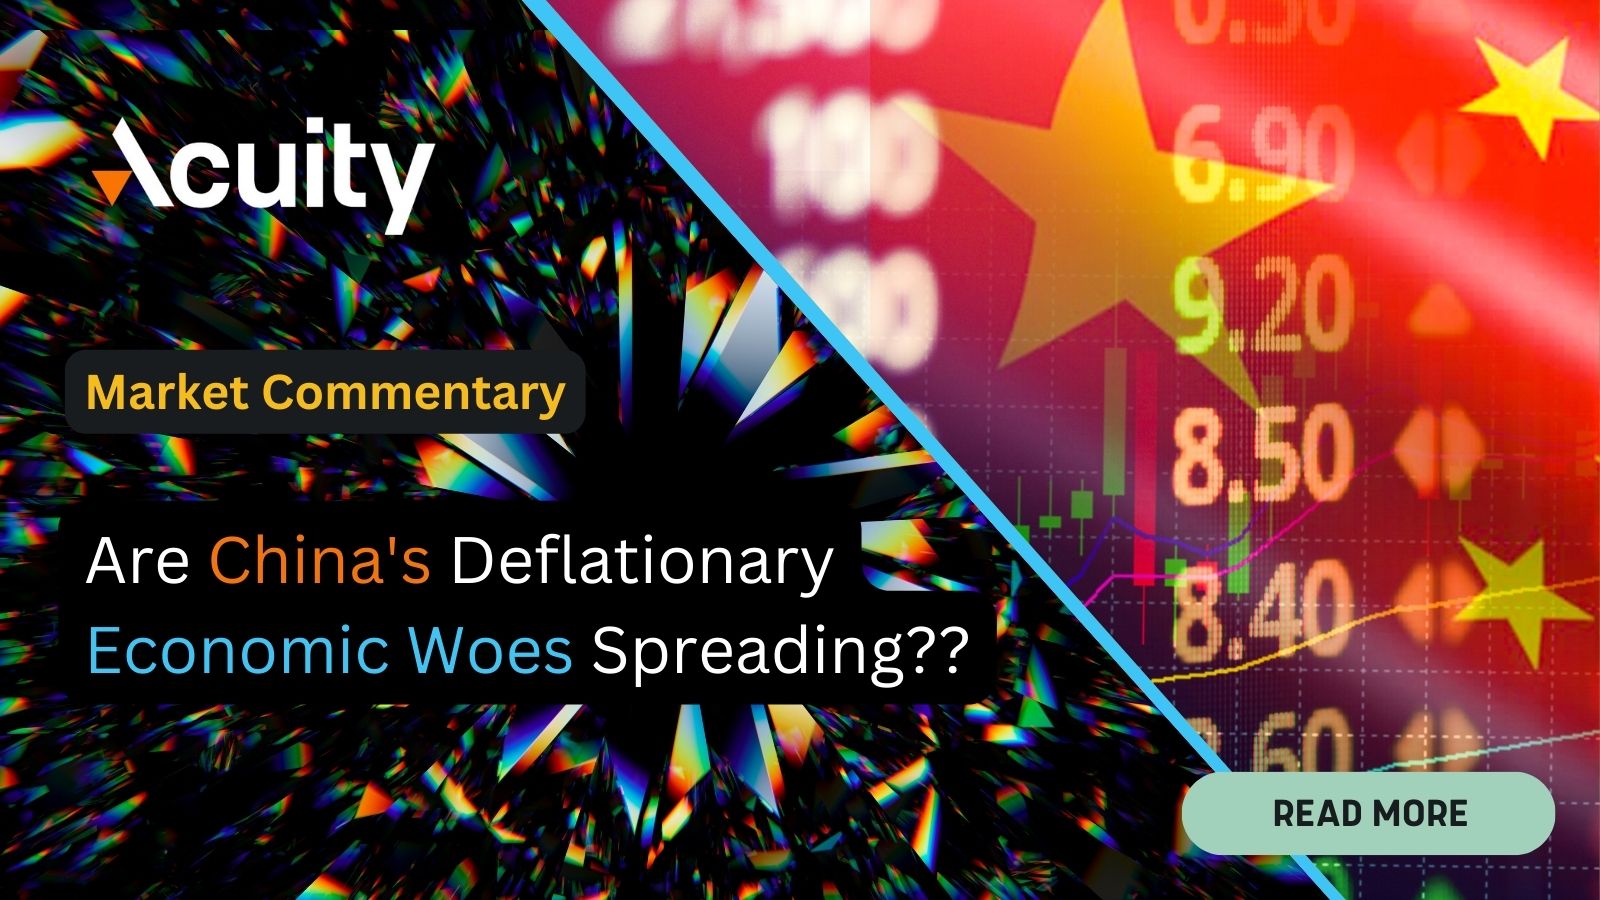 Are China's Deflationary Economic Woes Spreading?